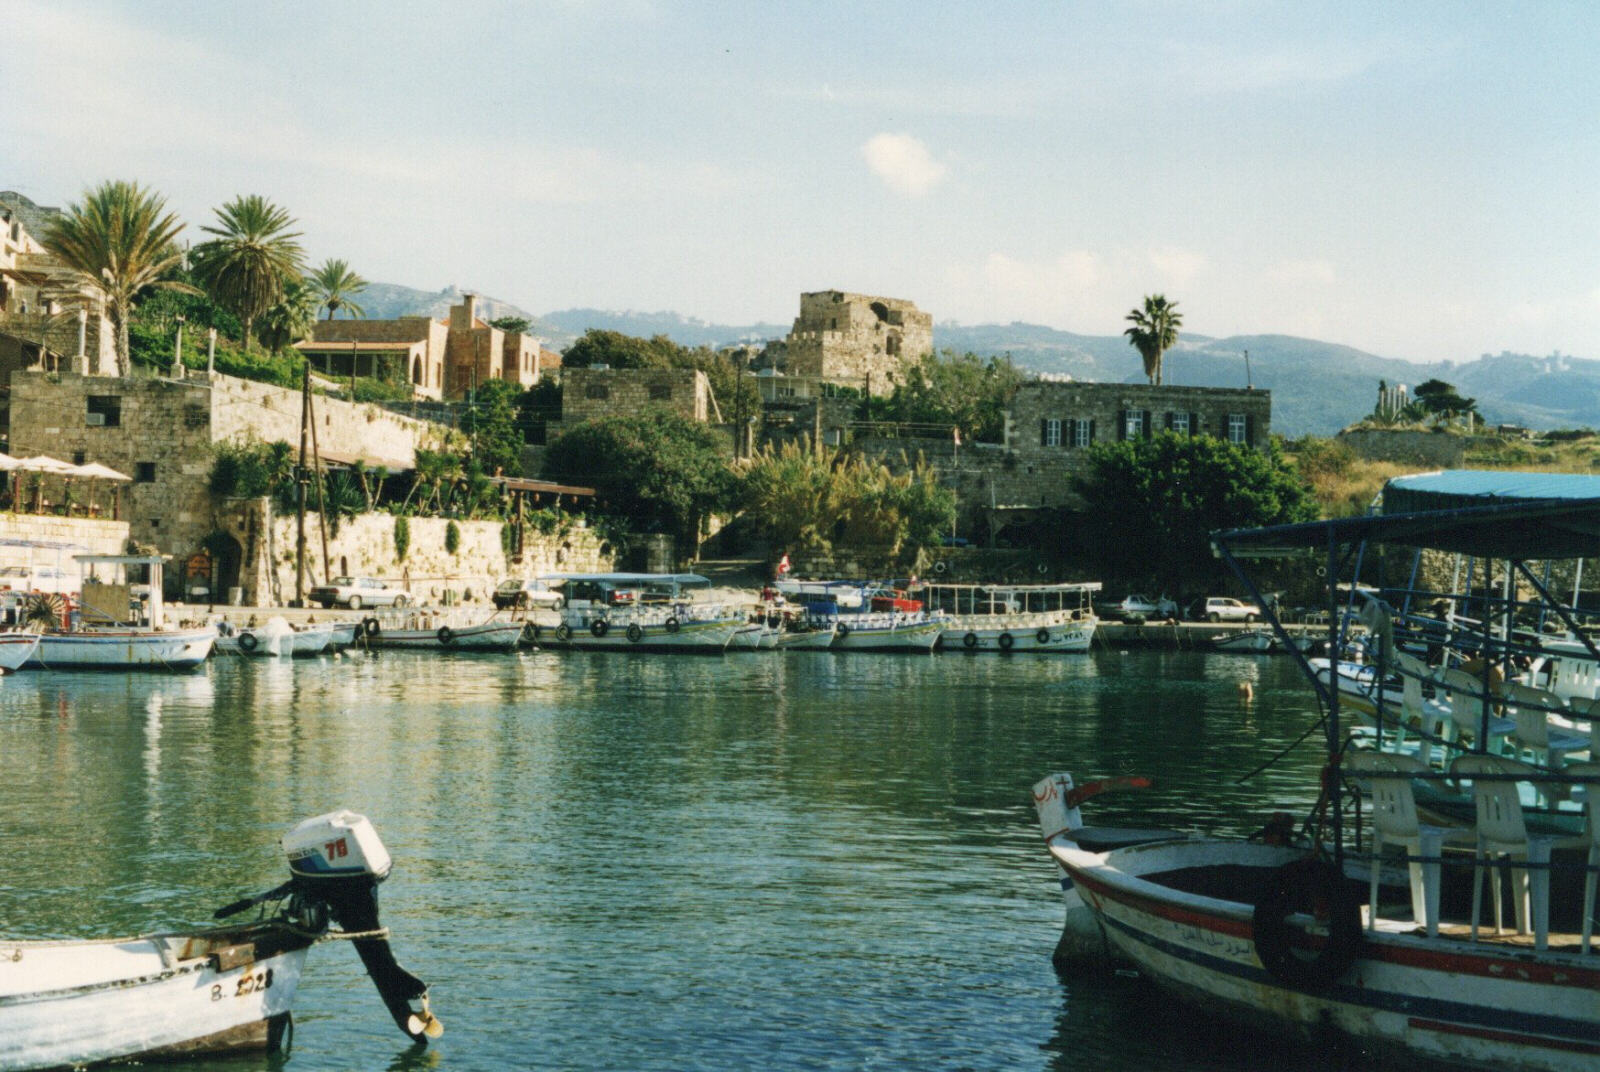 The harbour at Byblos, Lebanon